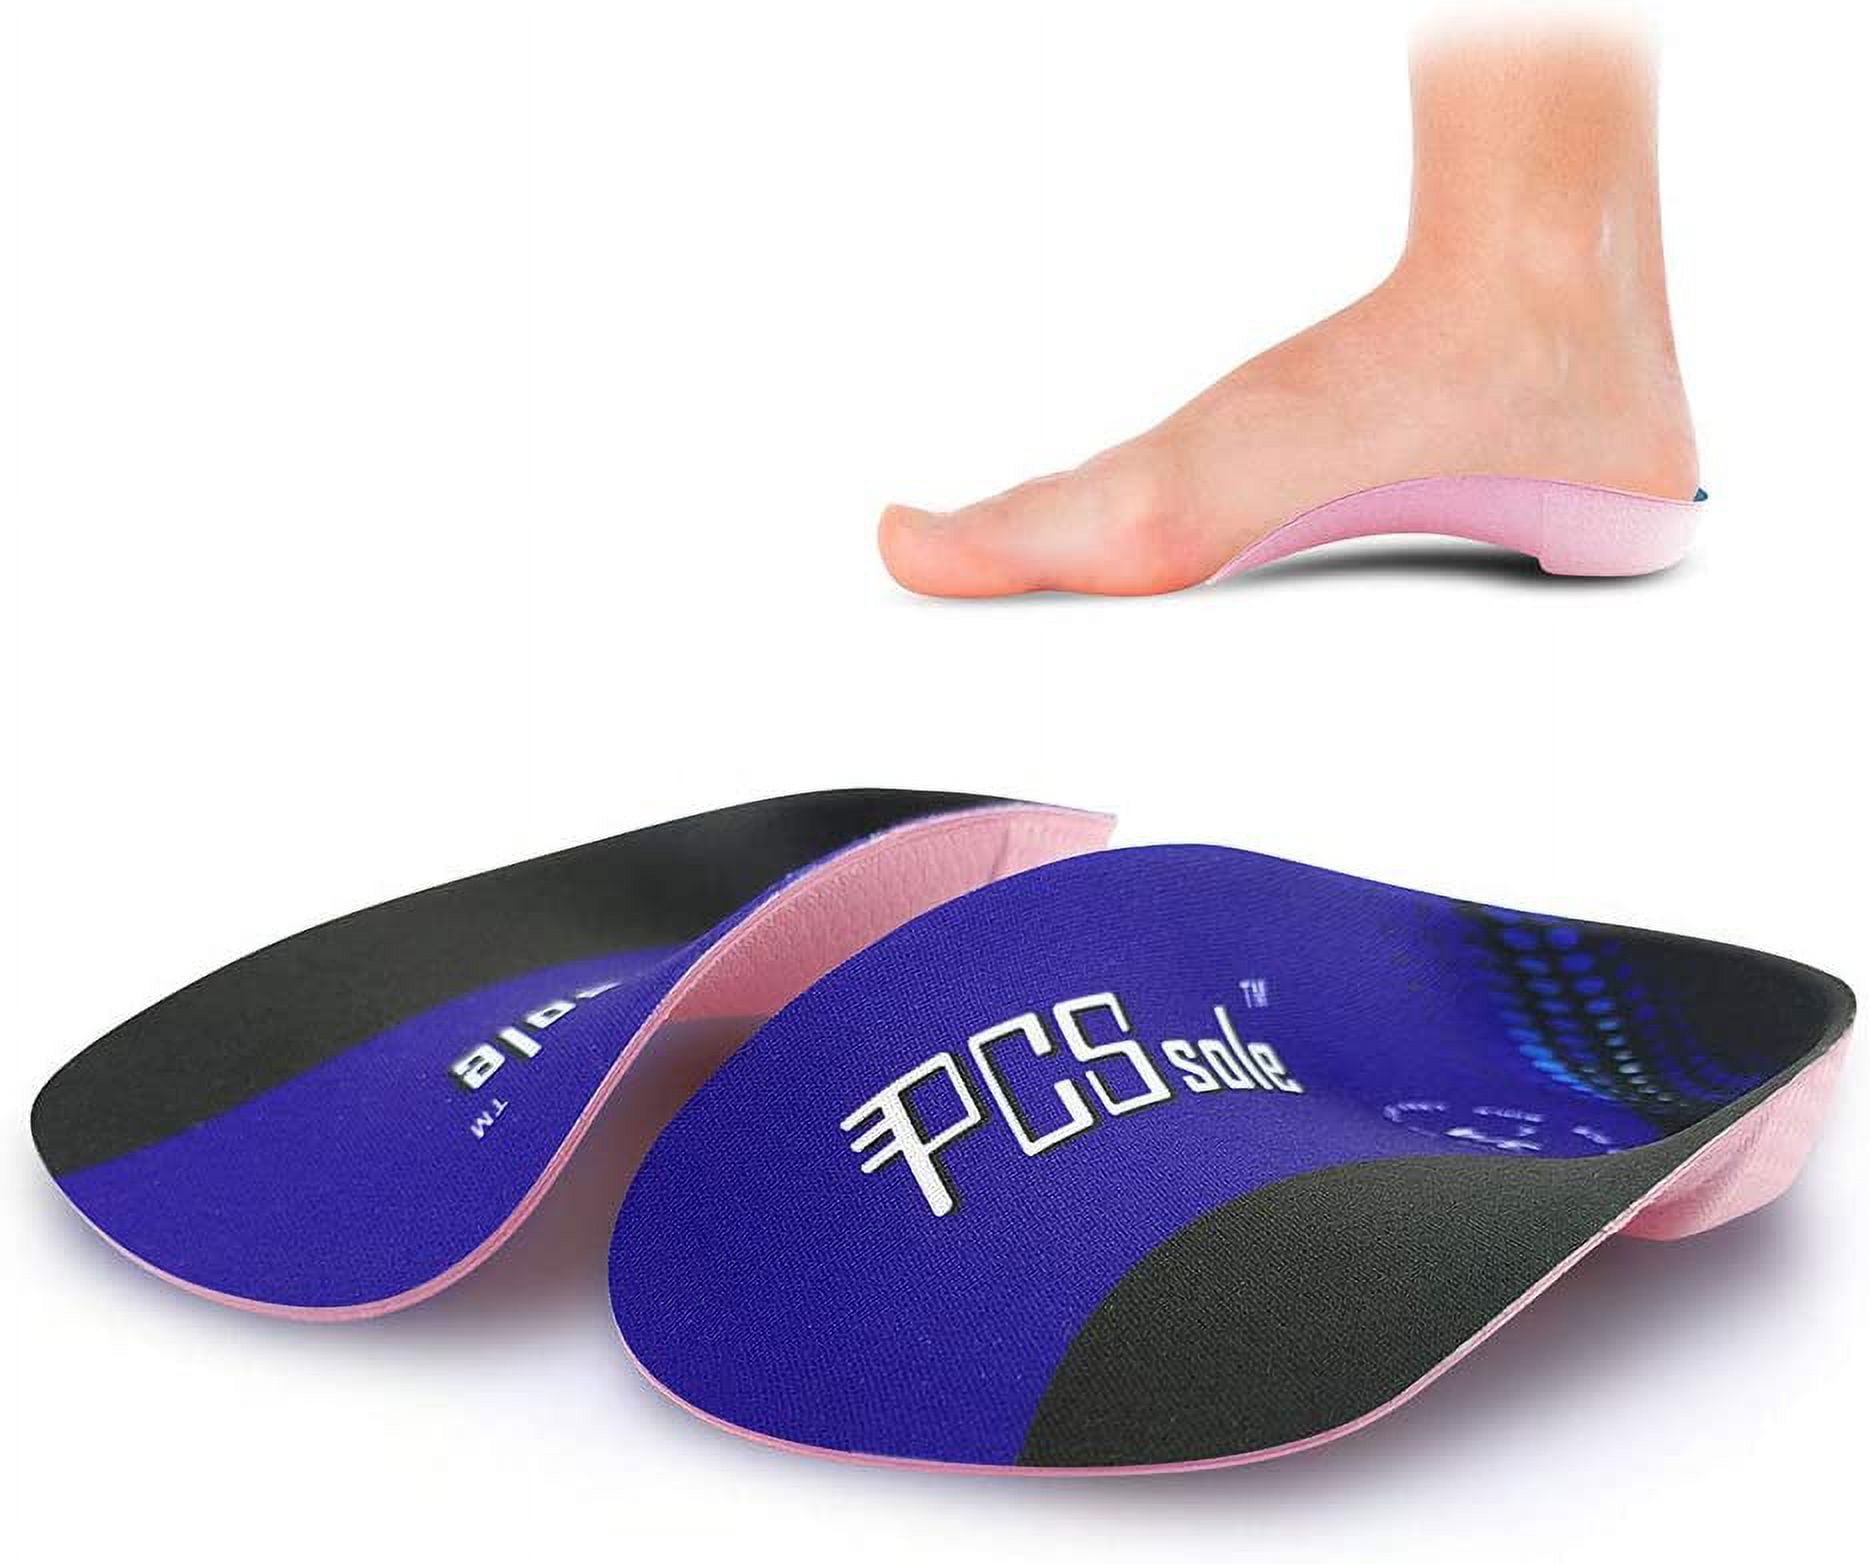 2x ORTHOTIC FOOT SUPPORT INSOLE FOR MEN WOMAN FLAT FEET HEEL ARCHES PAIN  RELIEF | eBay